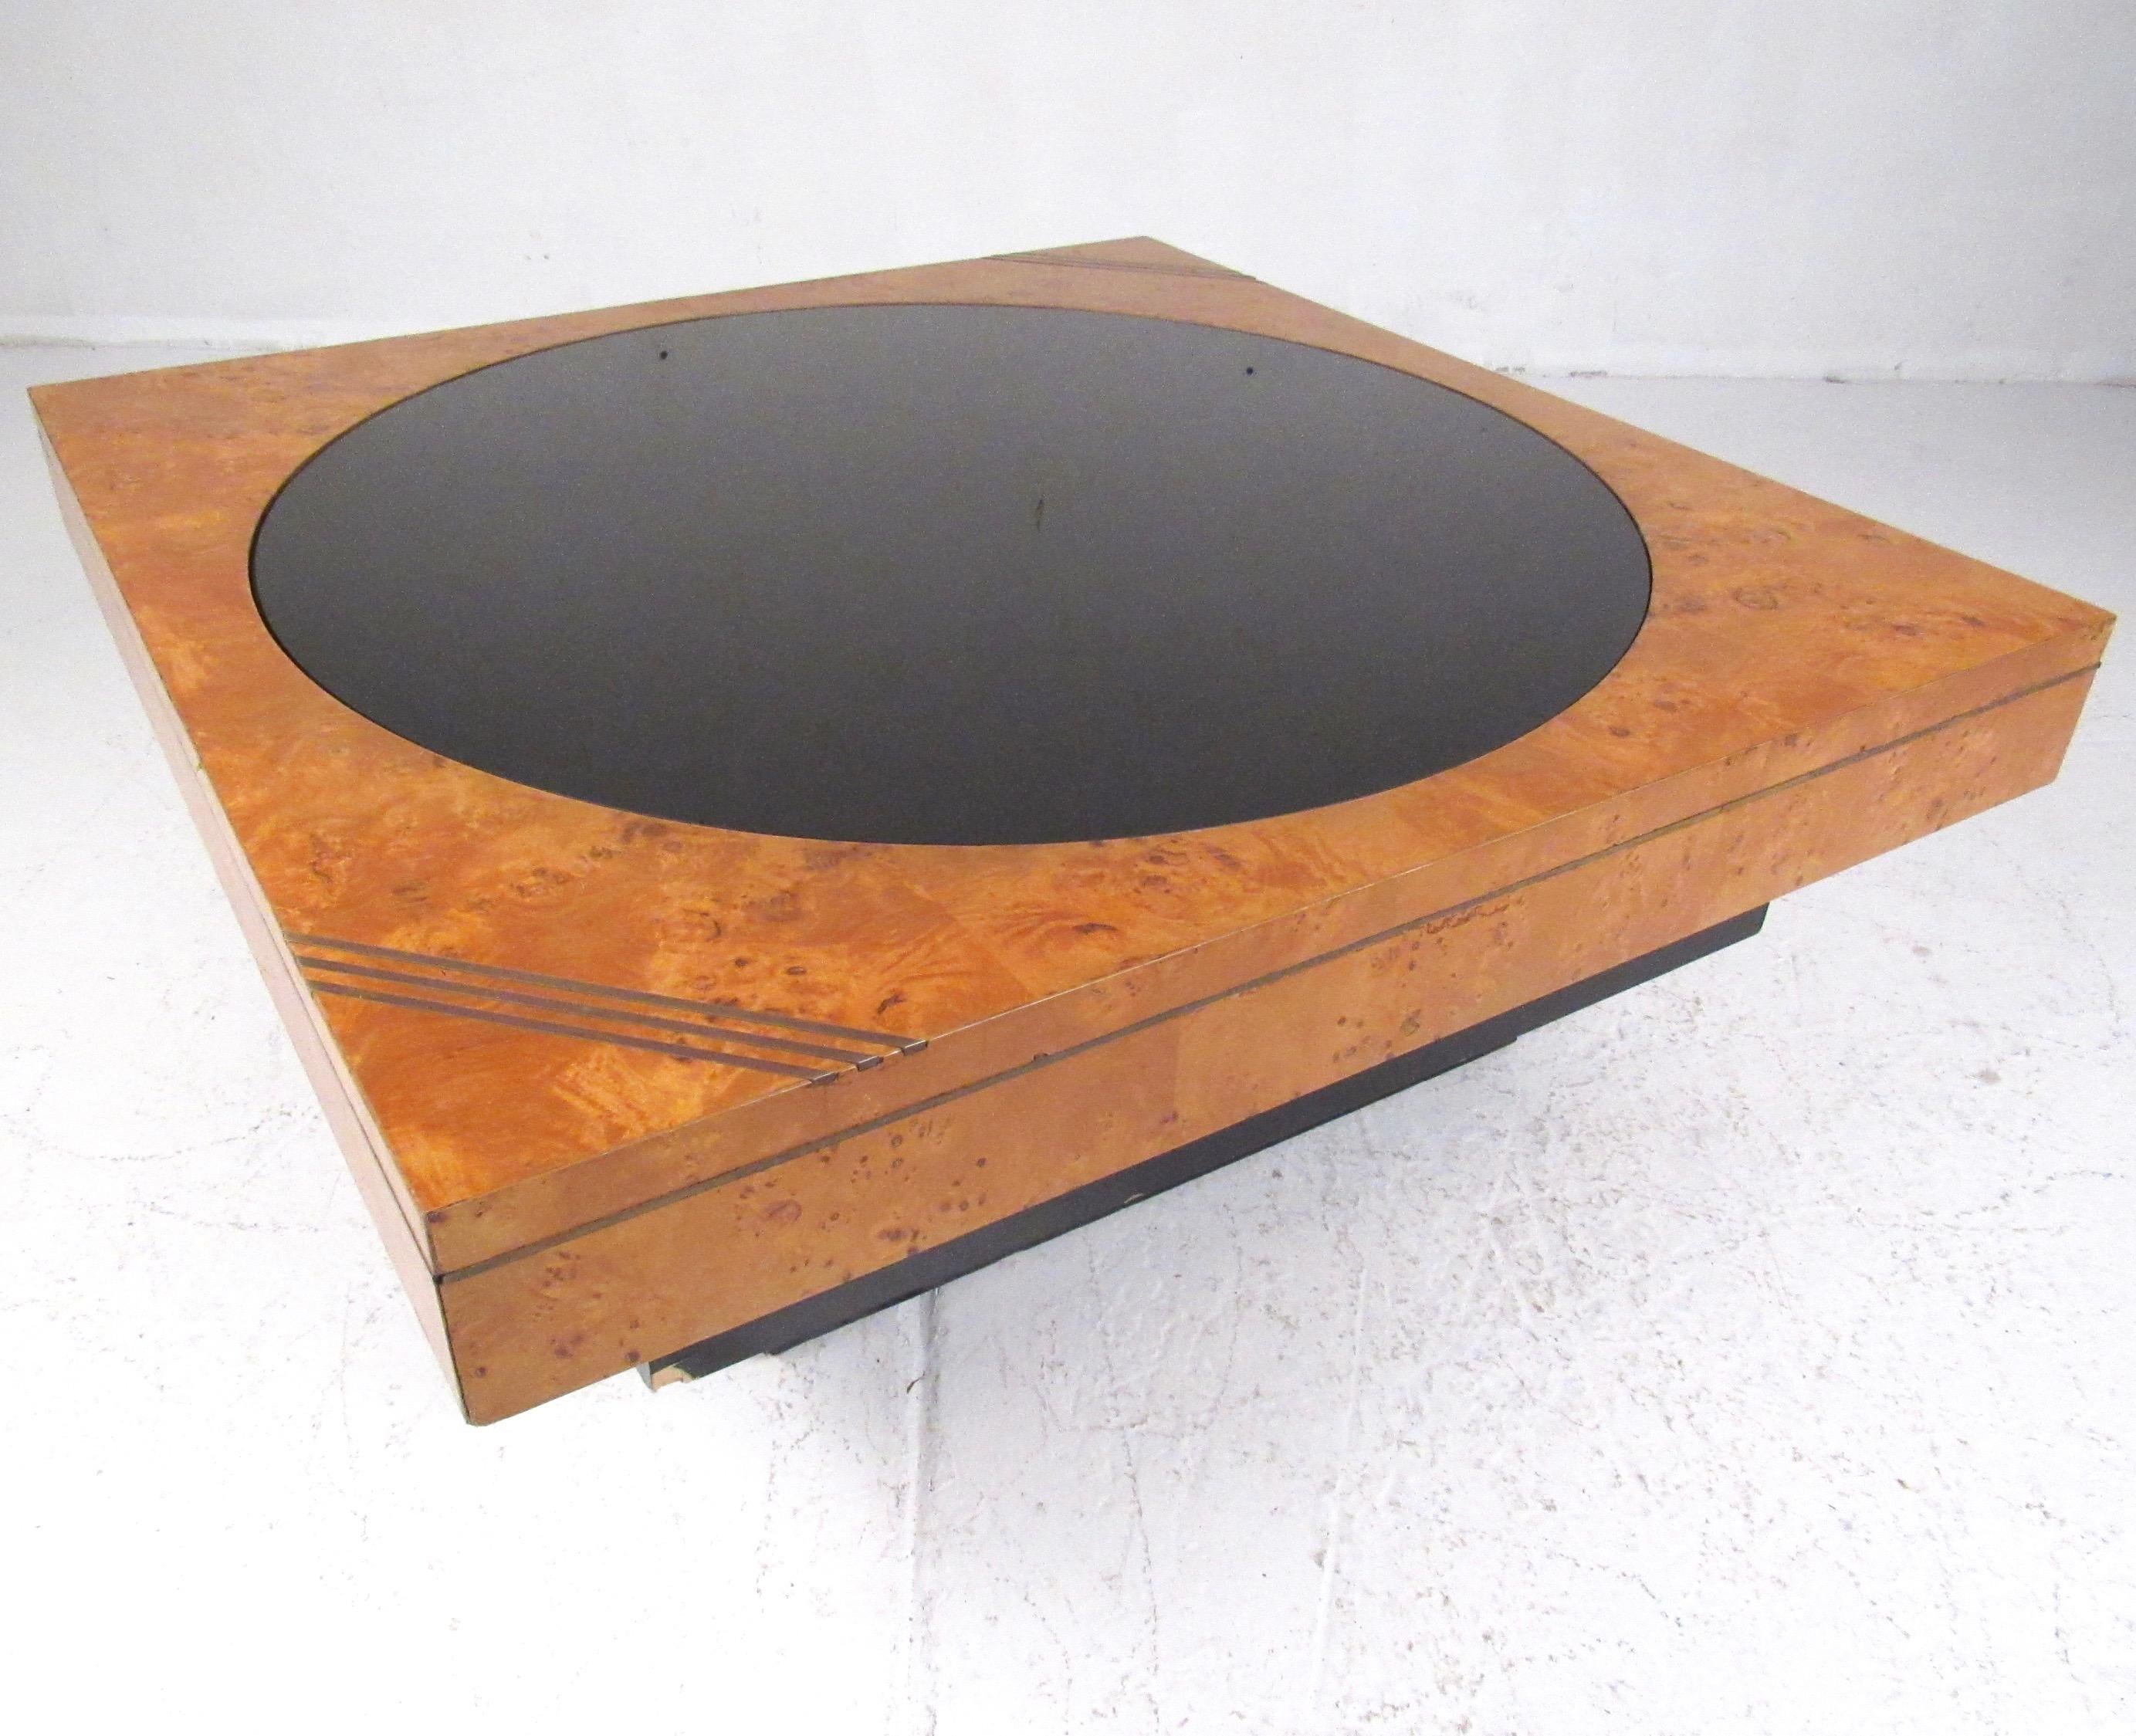 This stylish vintage modern coffee table by Lane features golden burl wood finish with unique brass finish details. Complimentary black lacquer base features elegant down lighting for added decorative affect. Circular dark glass center piece makes